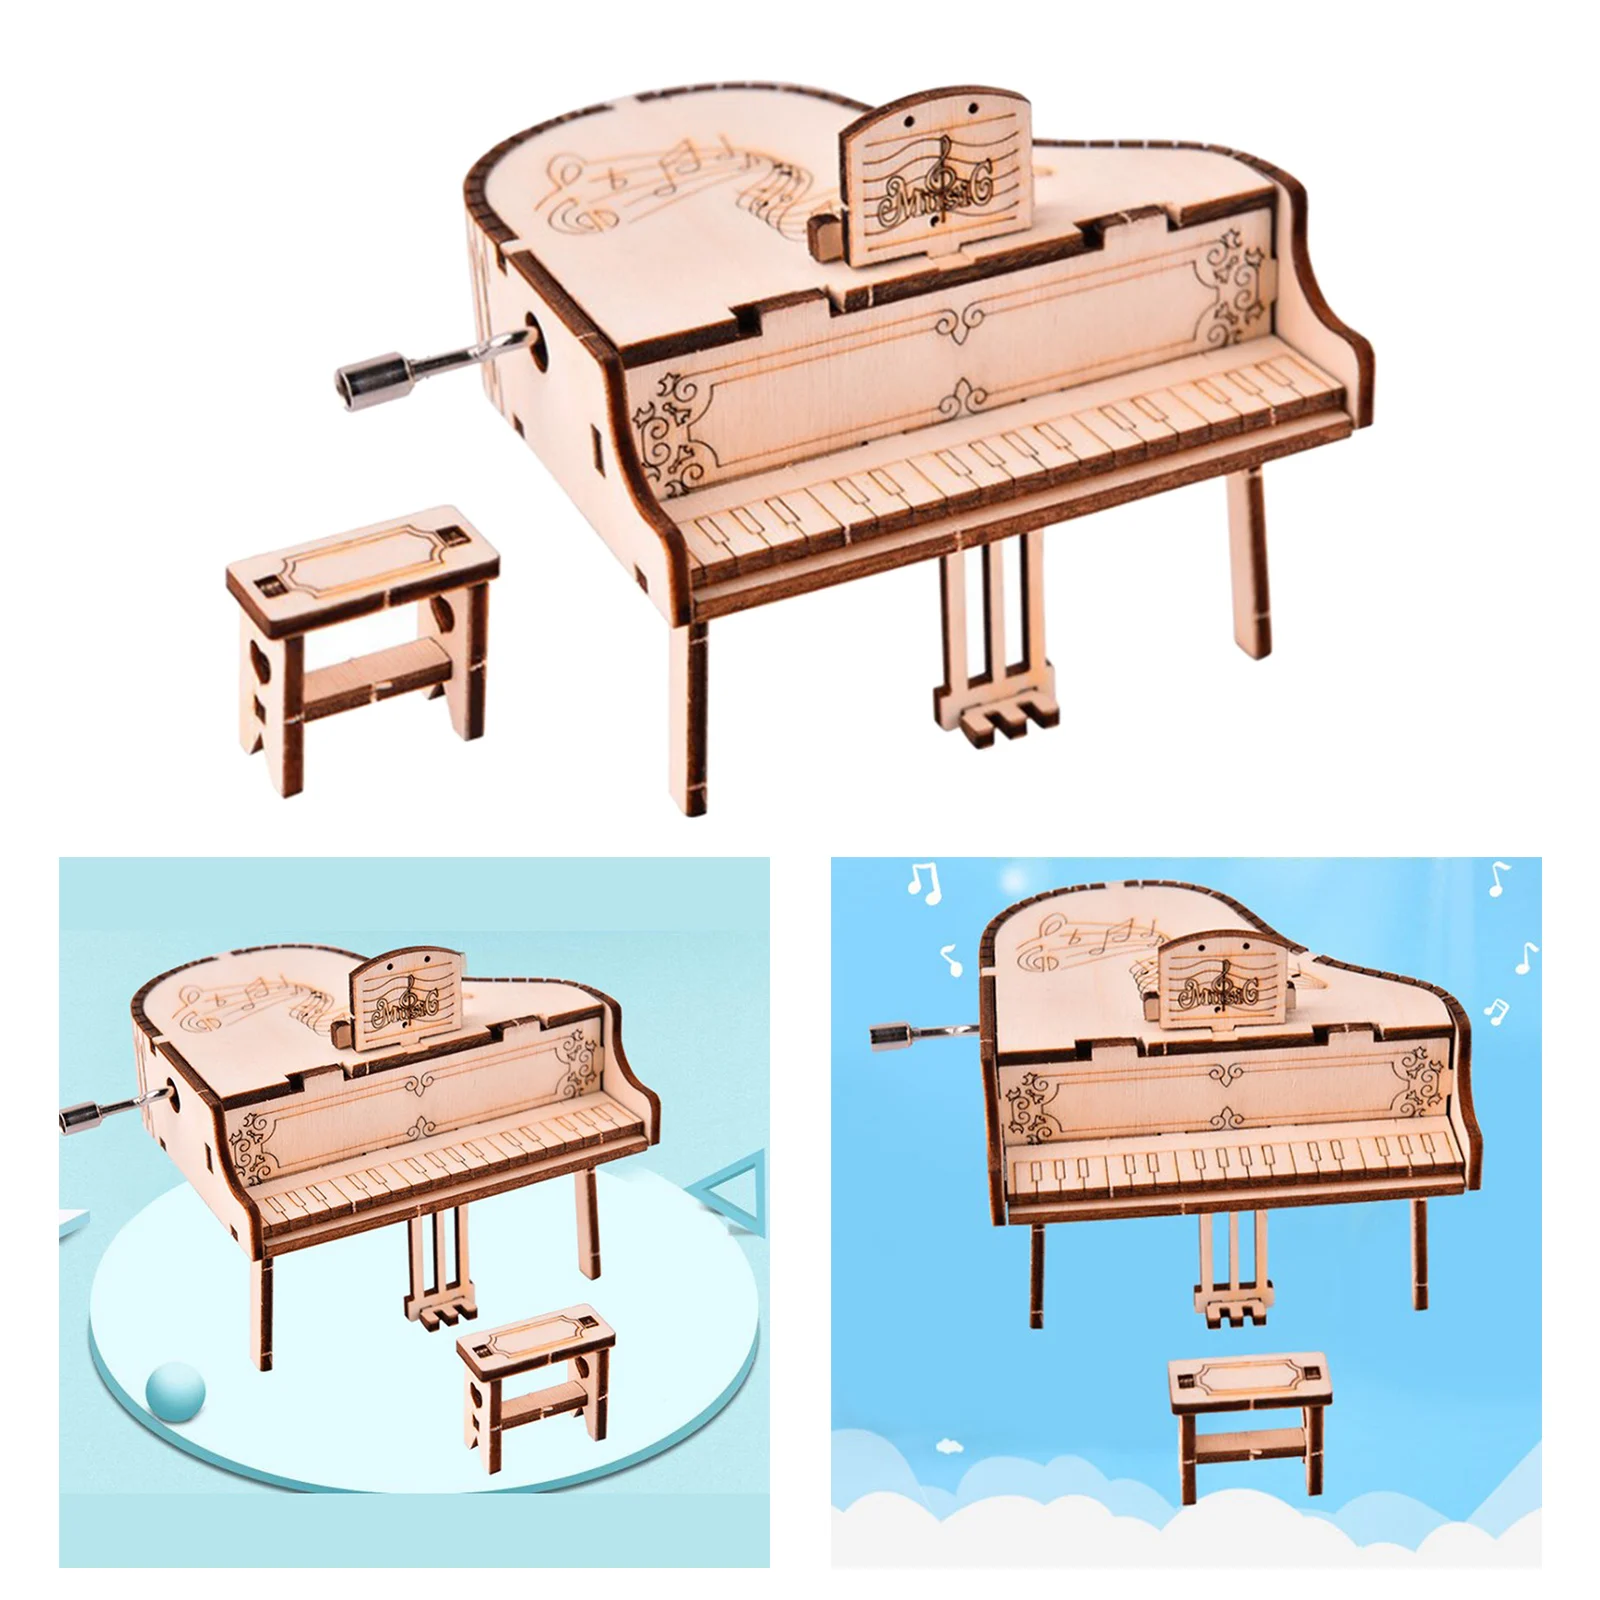 DIY Music Box, Grand Piano 3D Wooden Puzzle Model Kit, Laser Cut Wood Pieces, Educational Building Model Toy for Adults and Kids